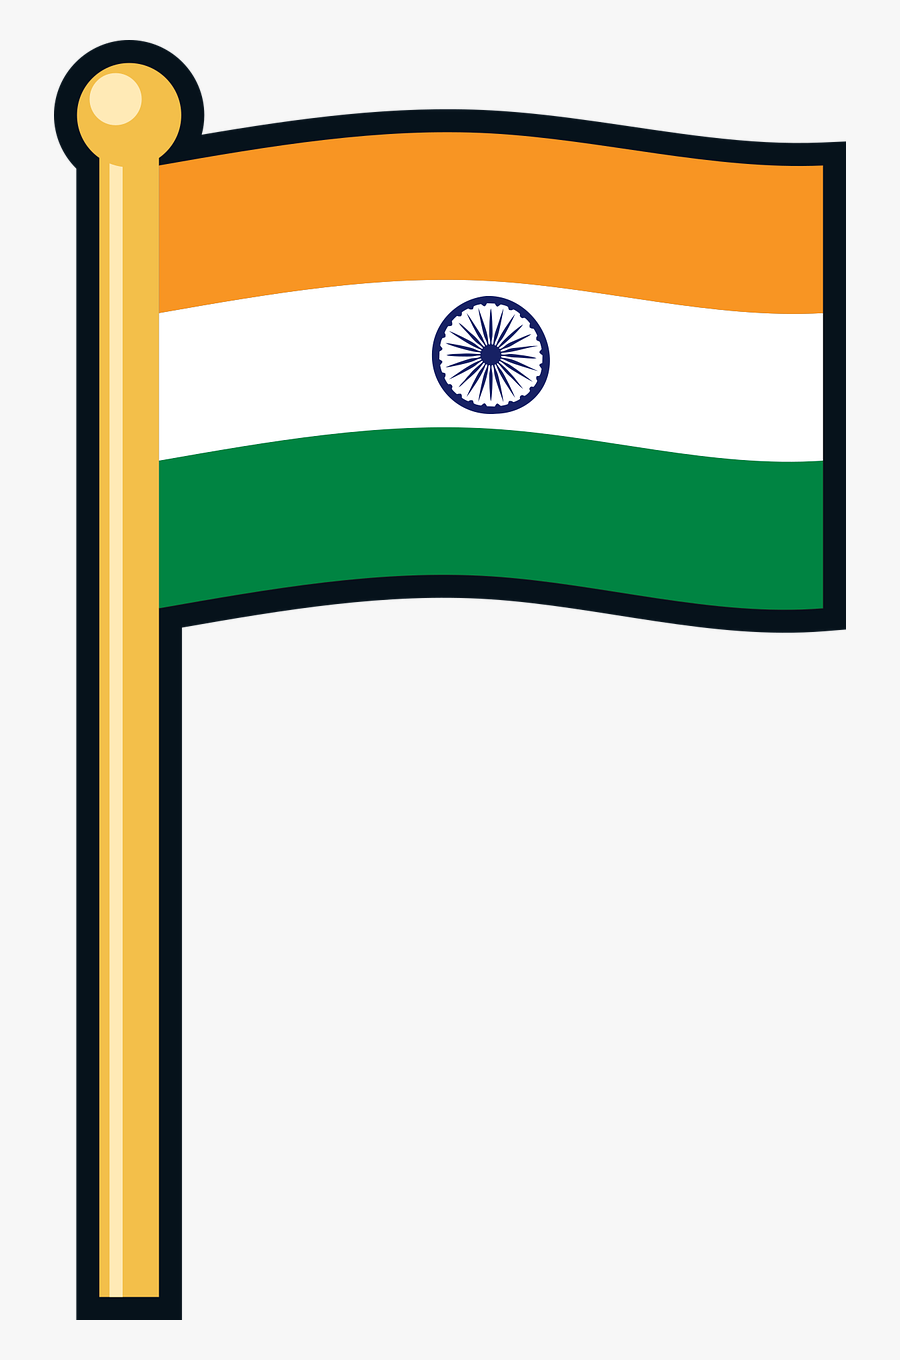 Transparent Indian Feathers Clipart - National Flag Of India Clipart, Transparent Clipart